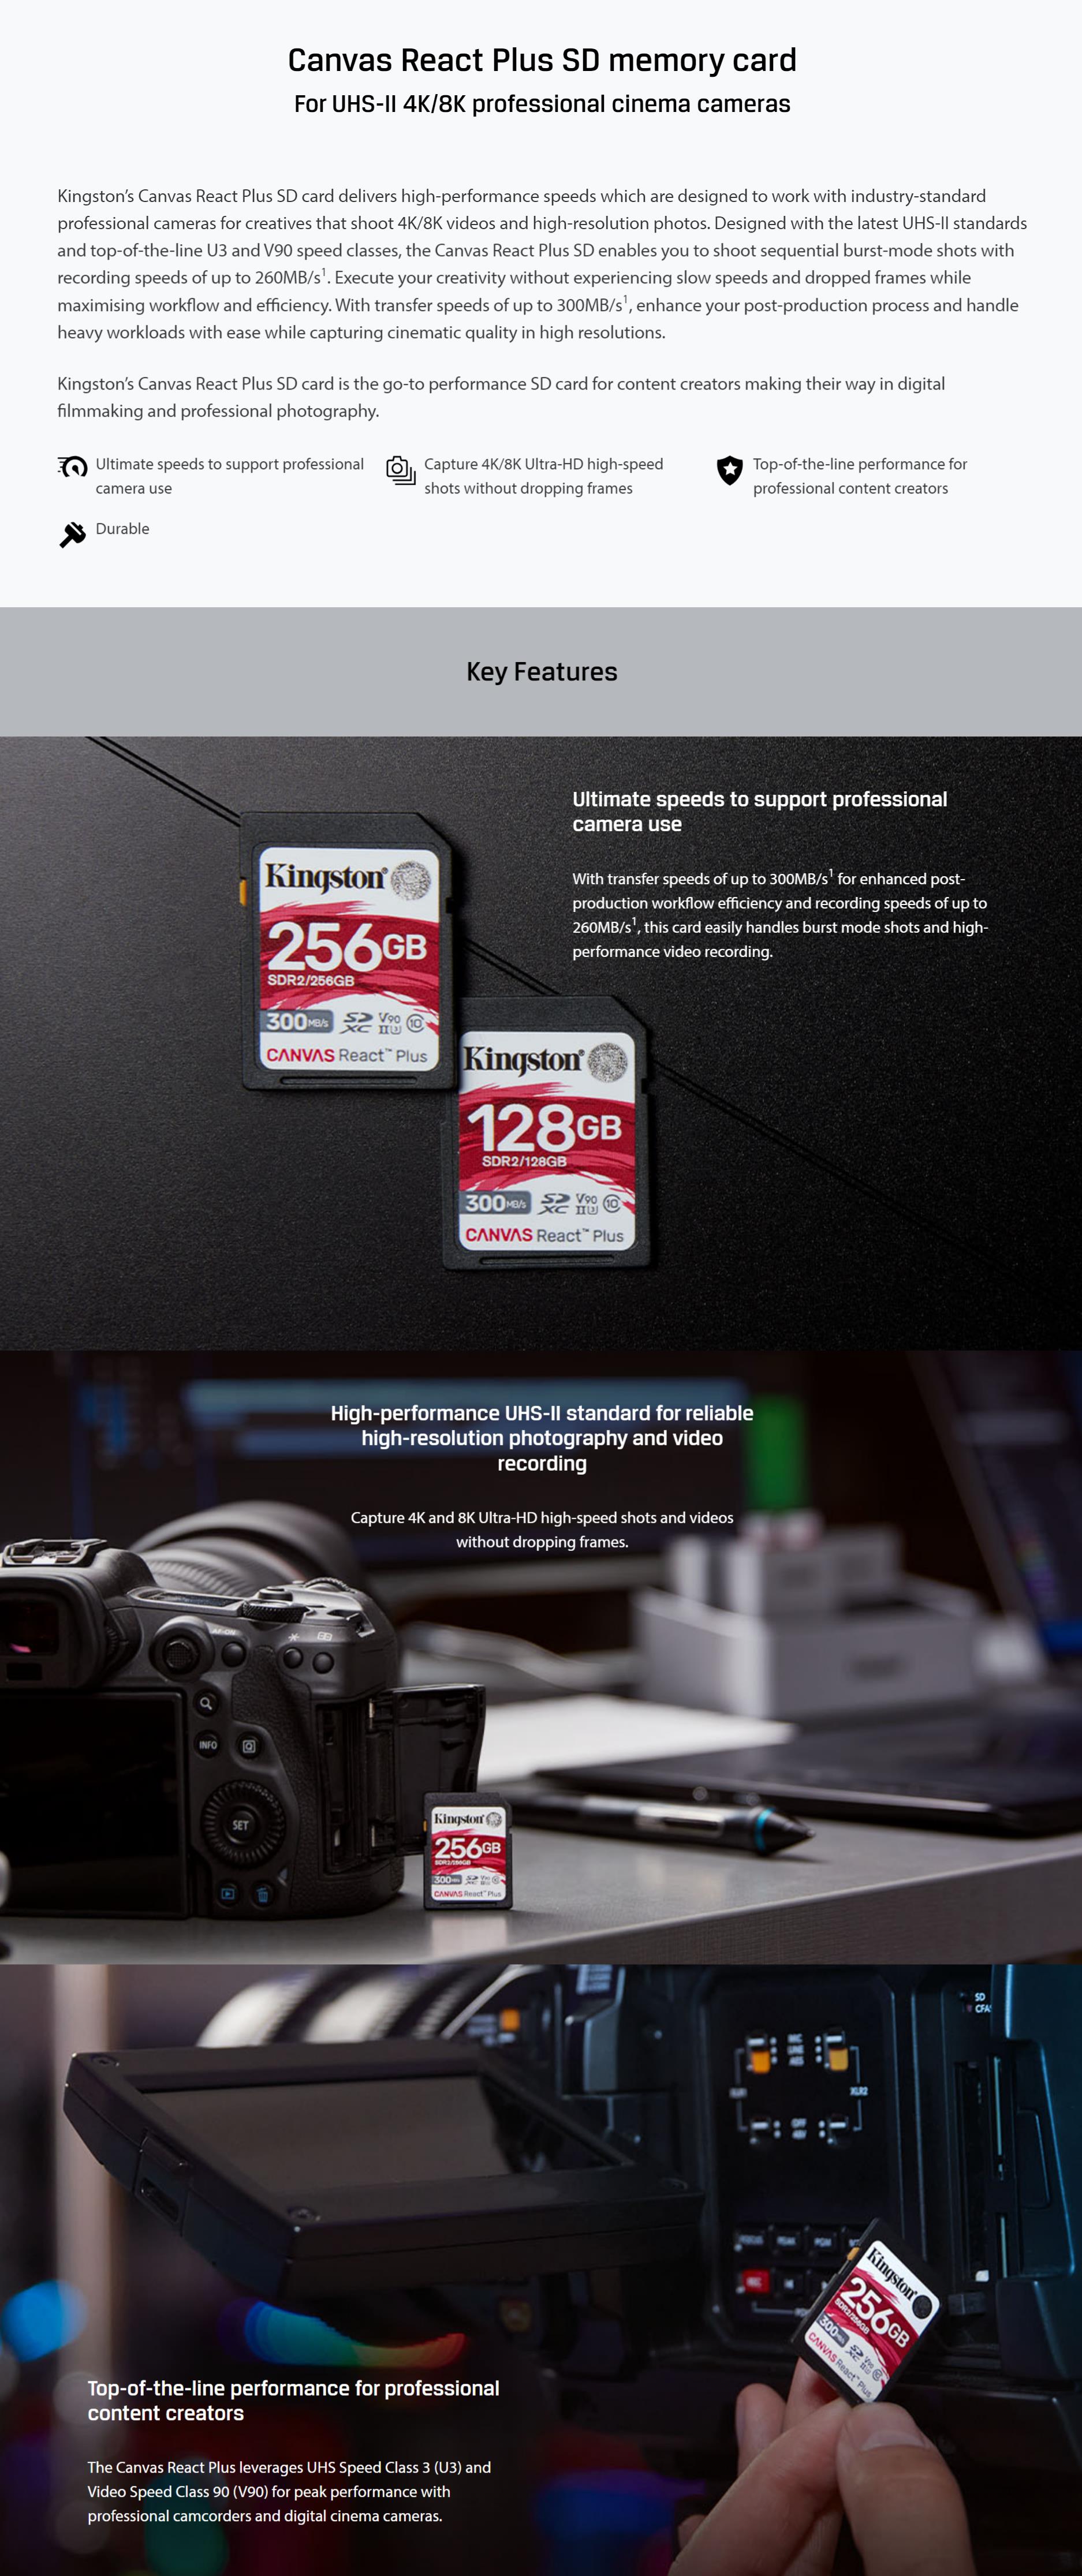 A large marketing image providing additional information about the product Kingston Canvas React Plus SD 64GB - Additional alt info not provided